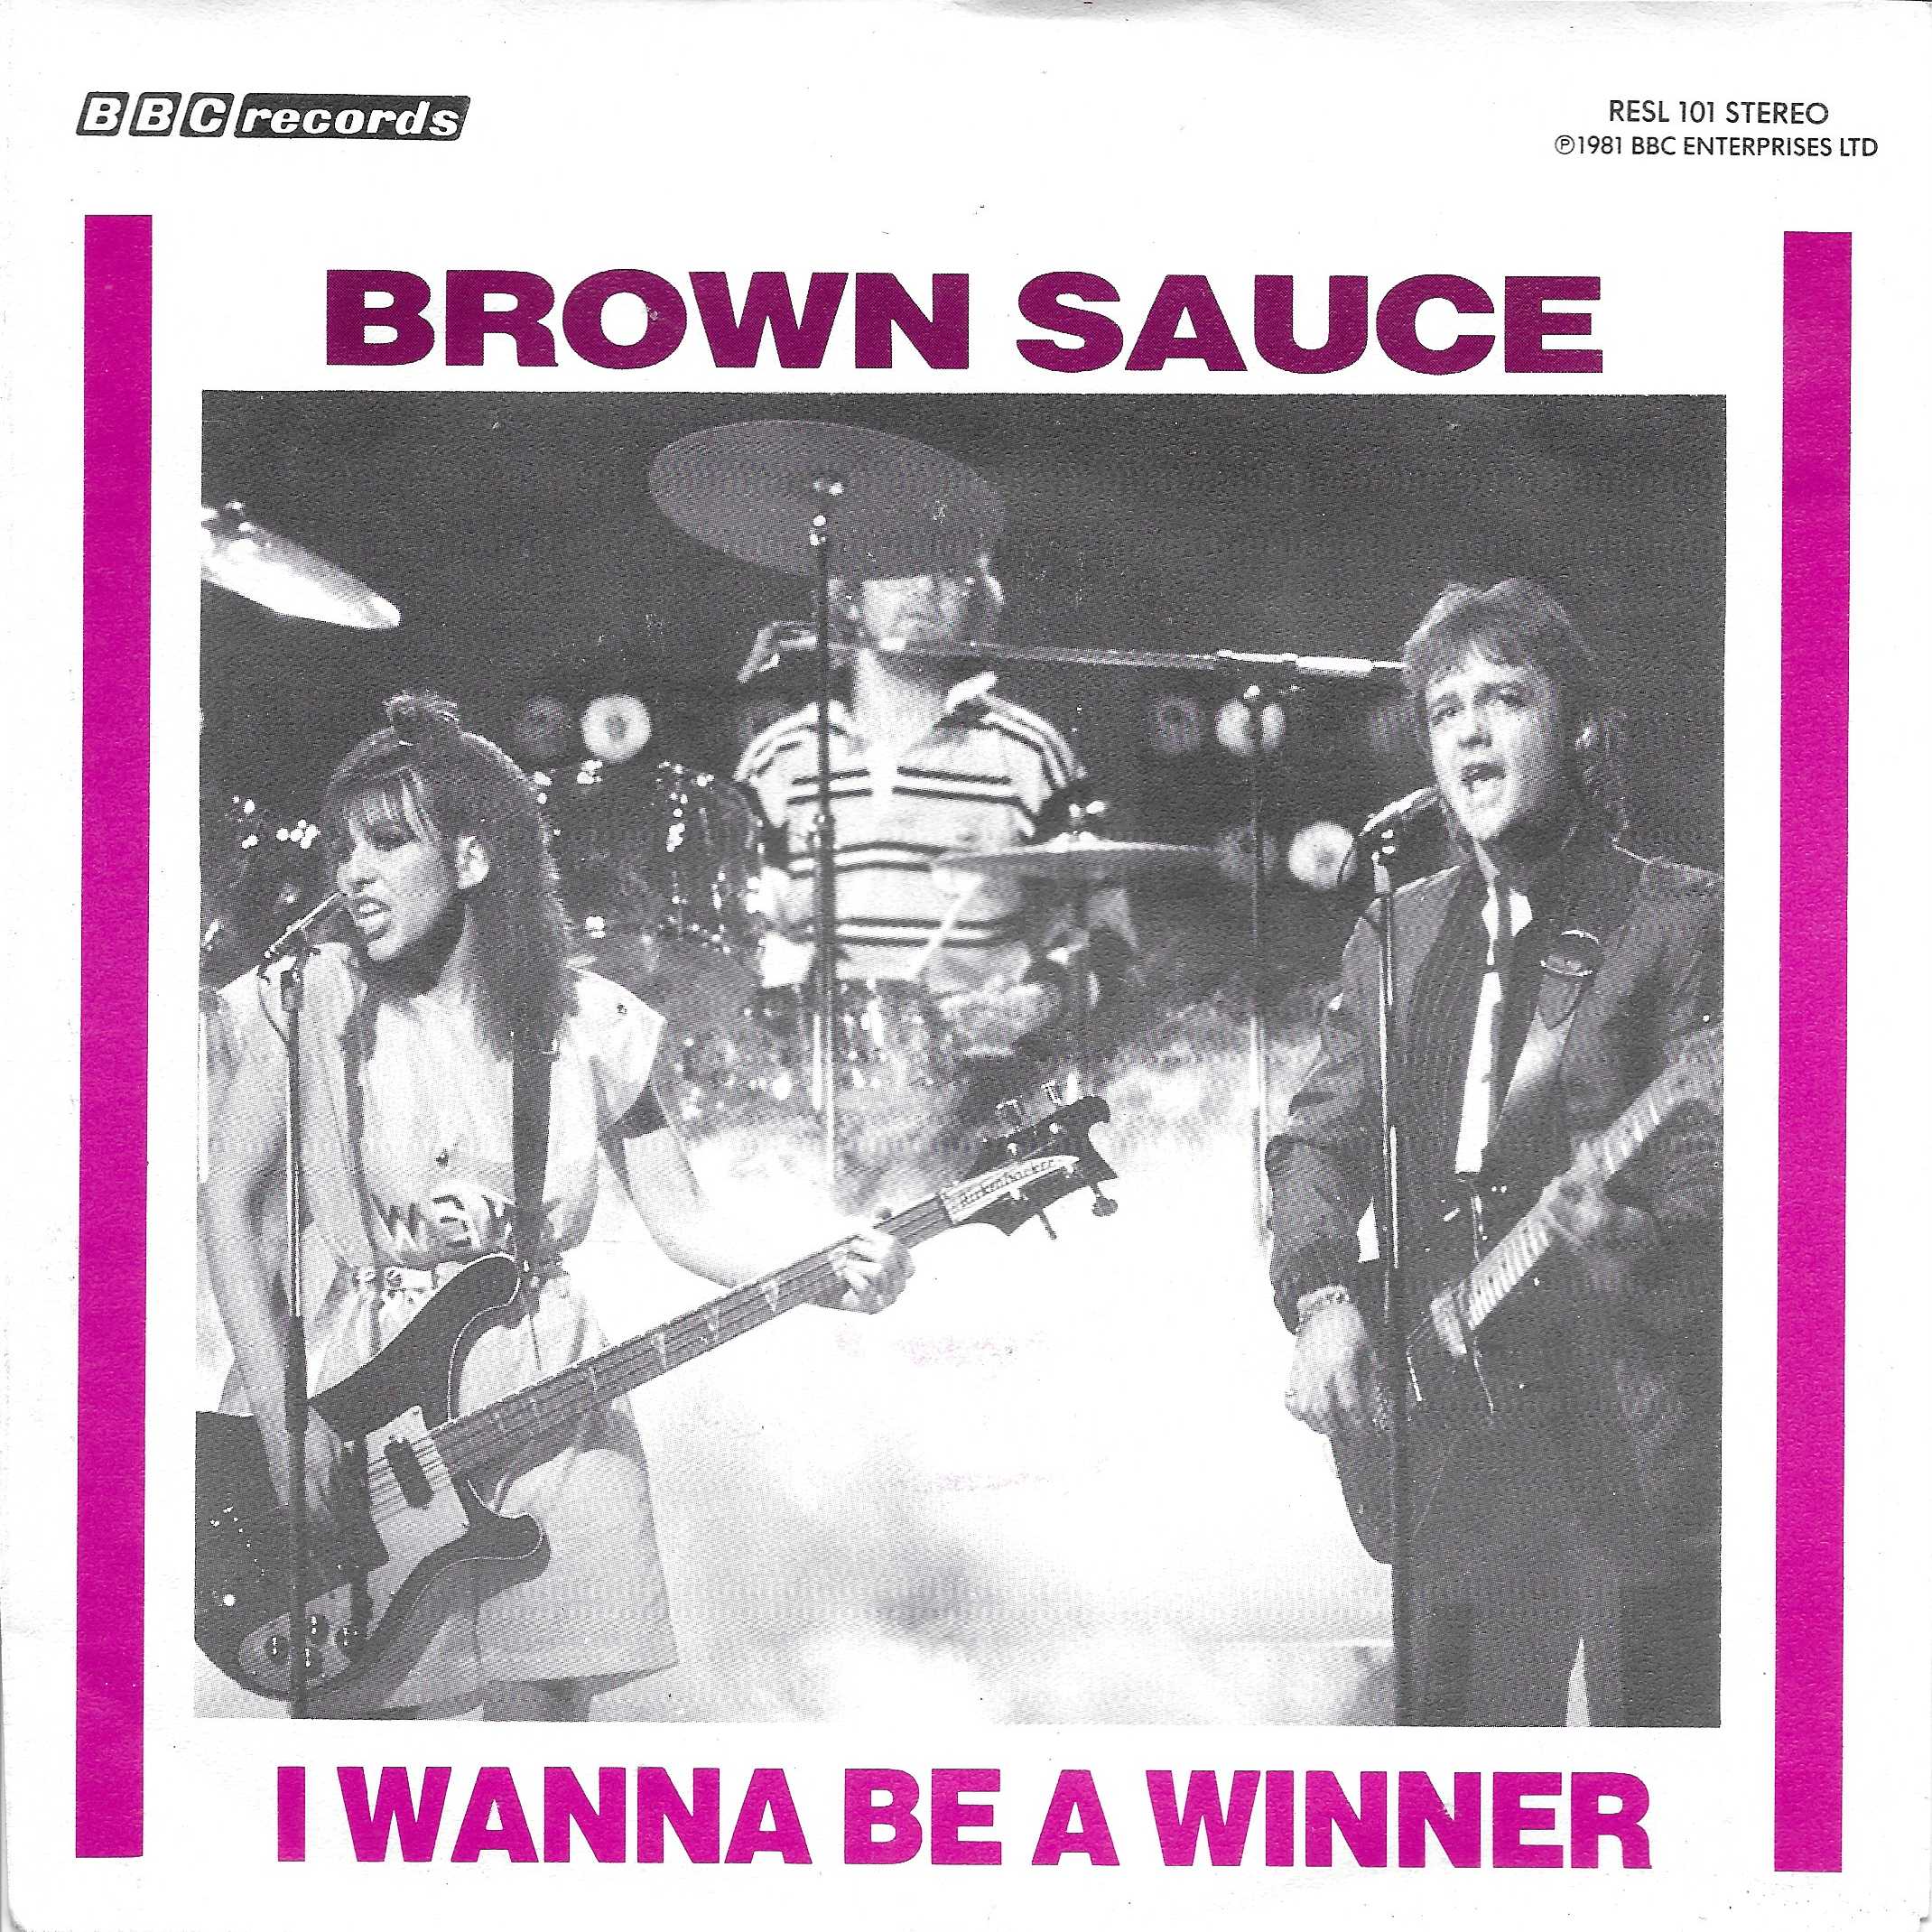 Picture of RESL 101-iD I wanna be a winner (Swap shop) (Dutch import) single by artist B. A. Robertson from the BBC records and Tapes library